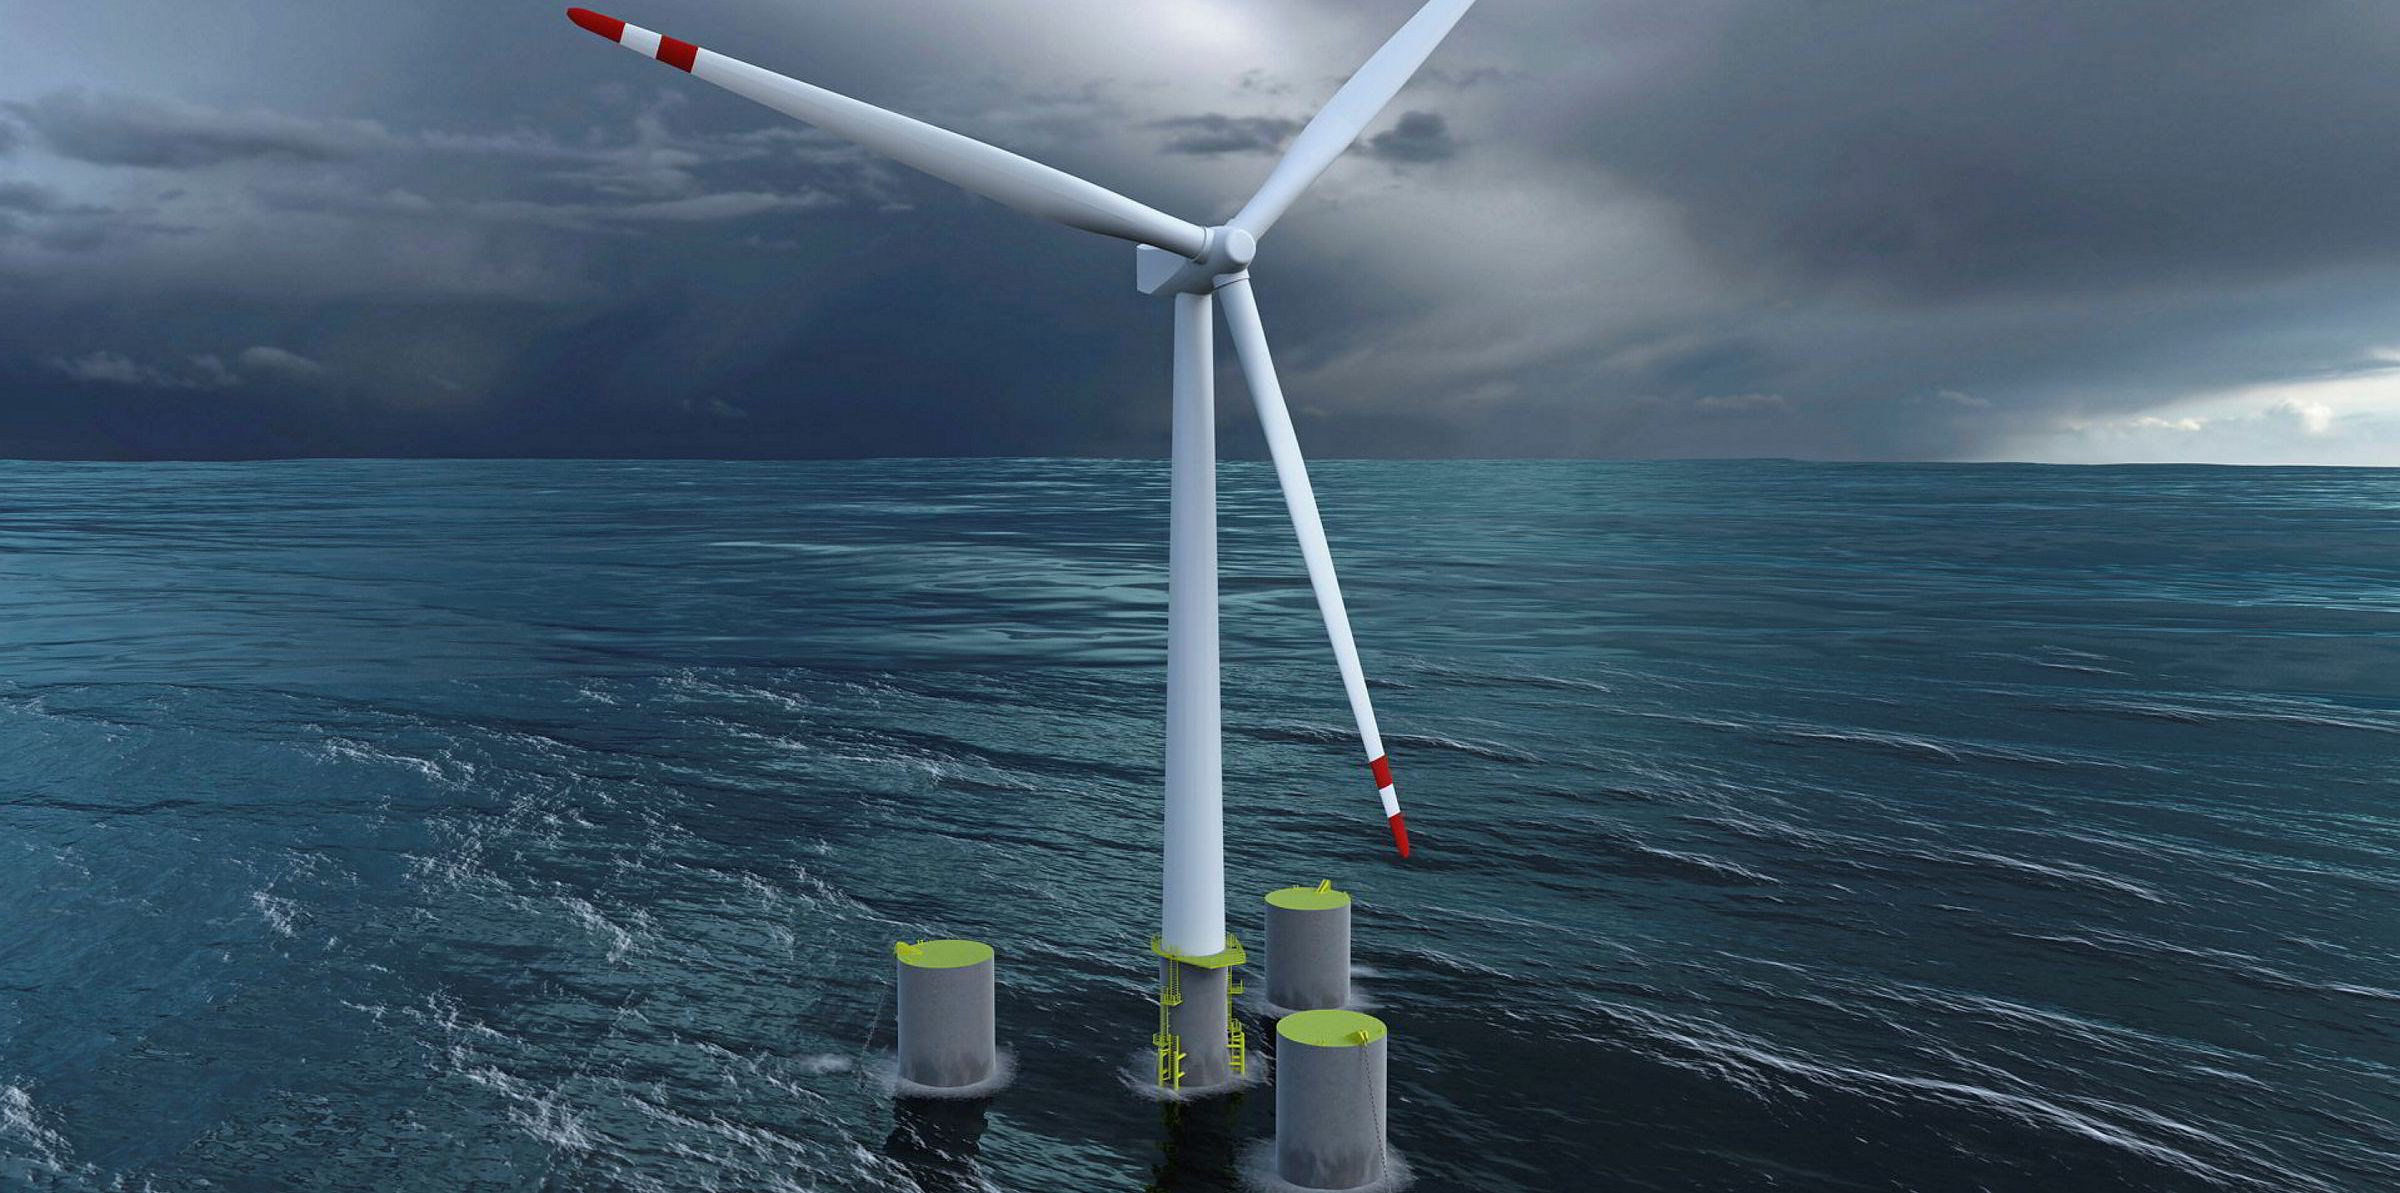 'World's largest floating wind turbine' by 2022 off Norway as Iberdrola